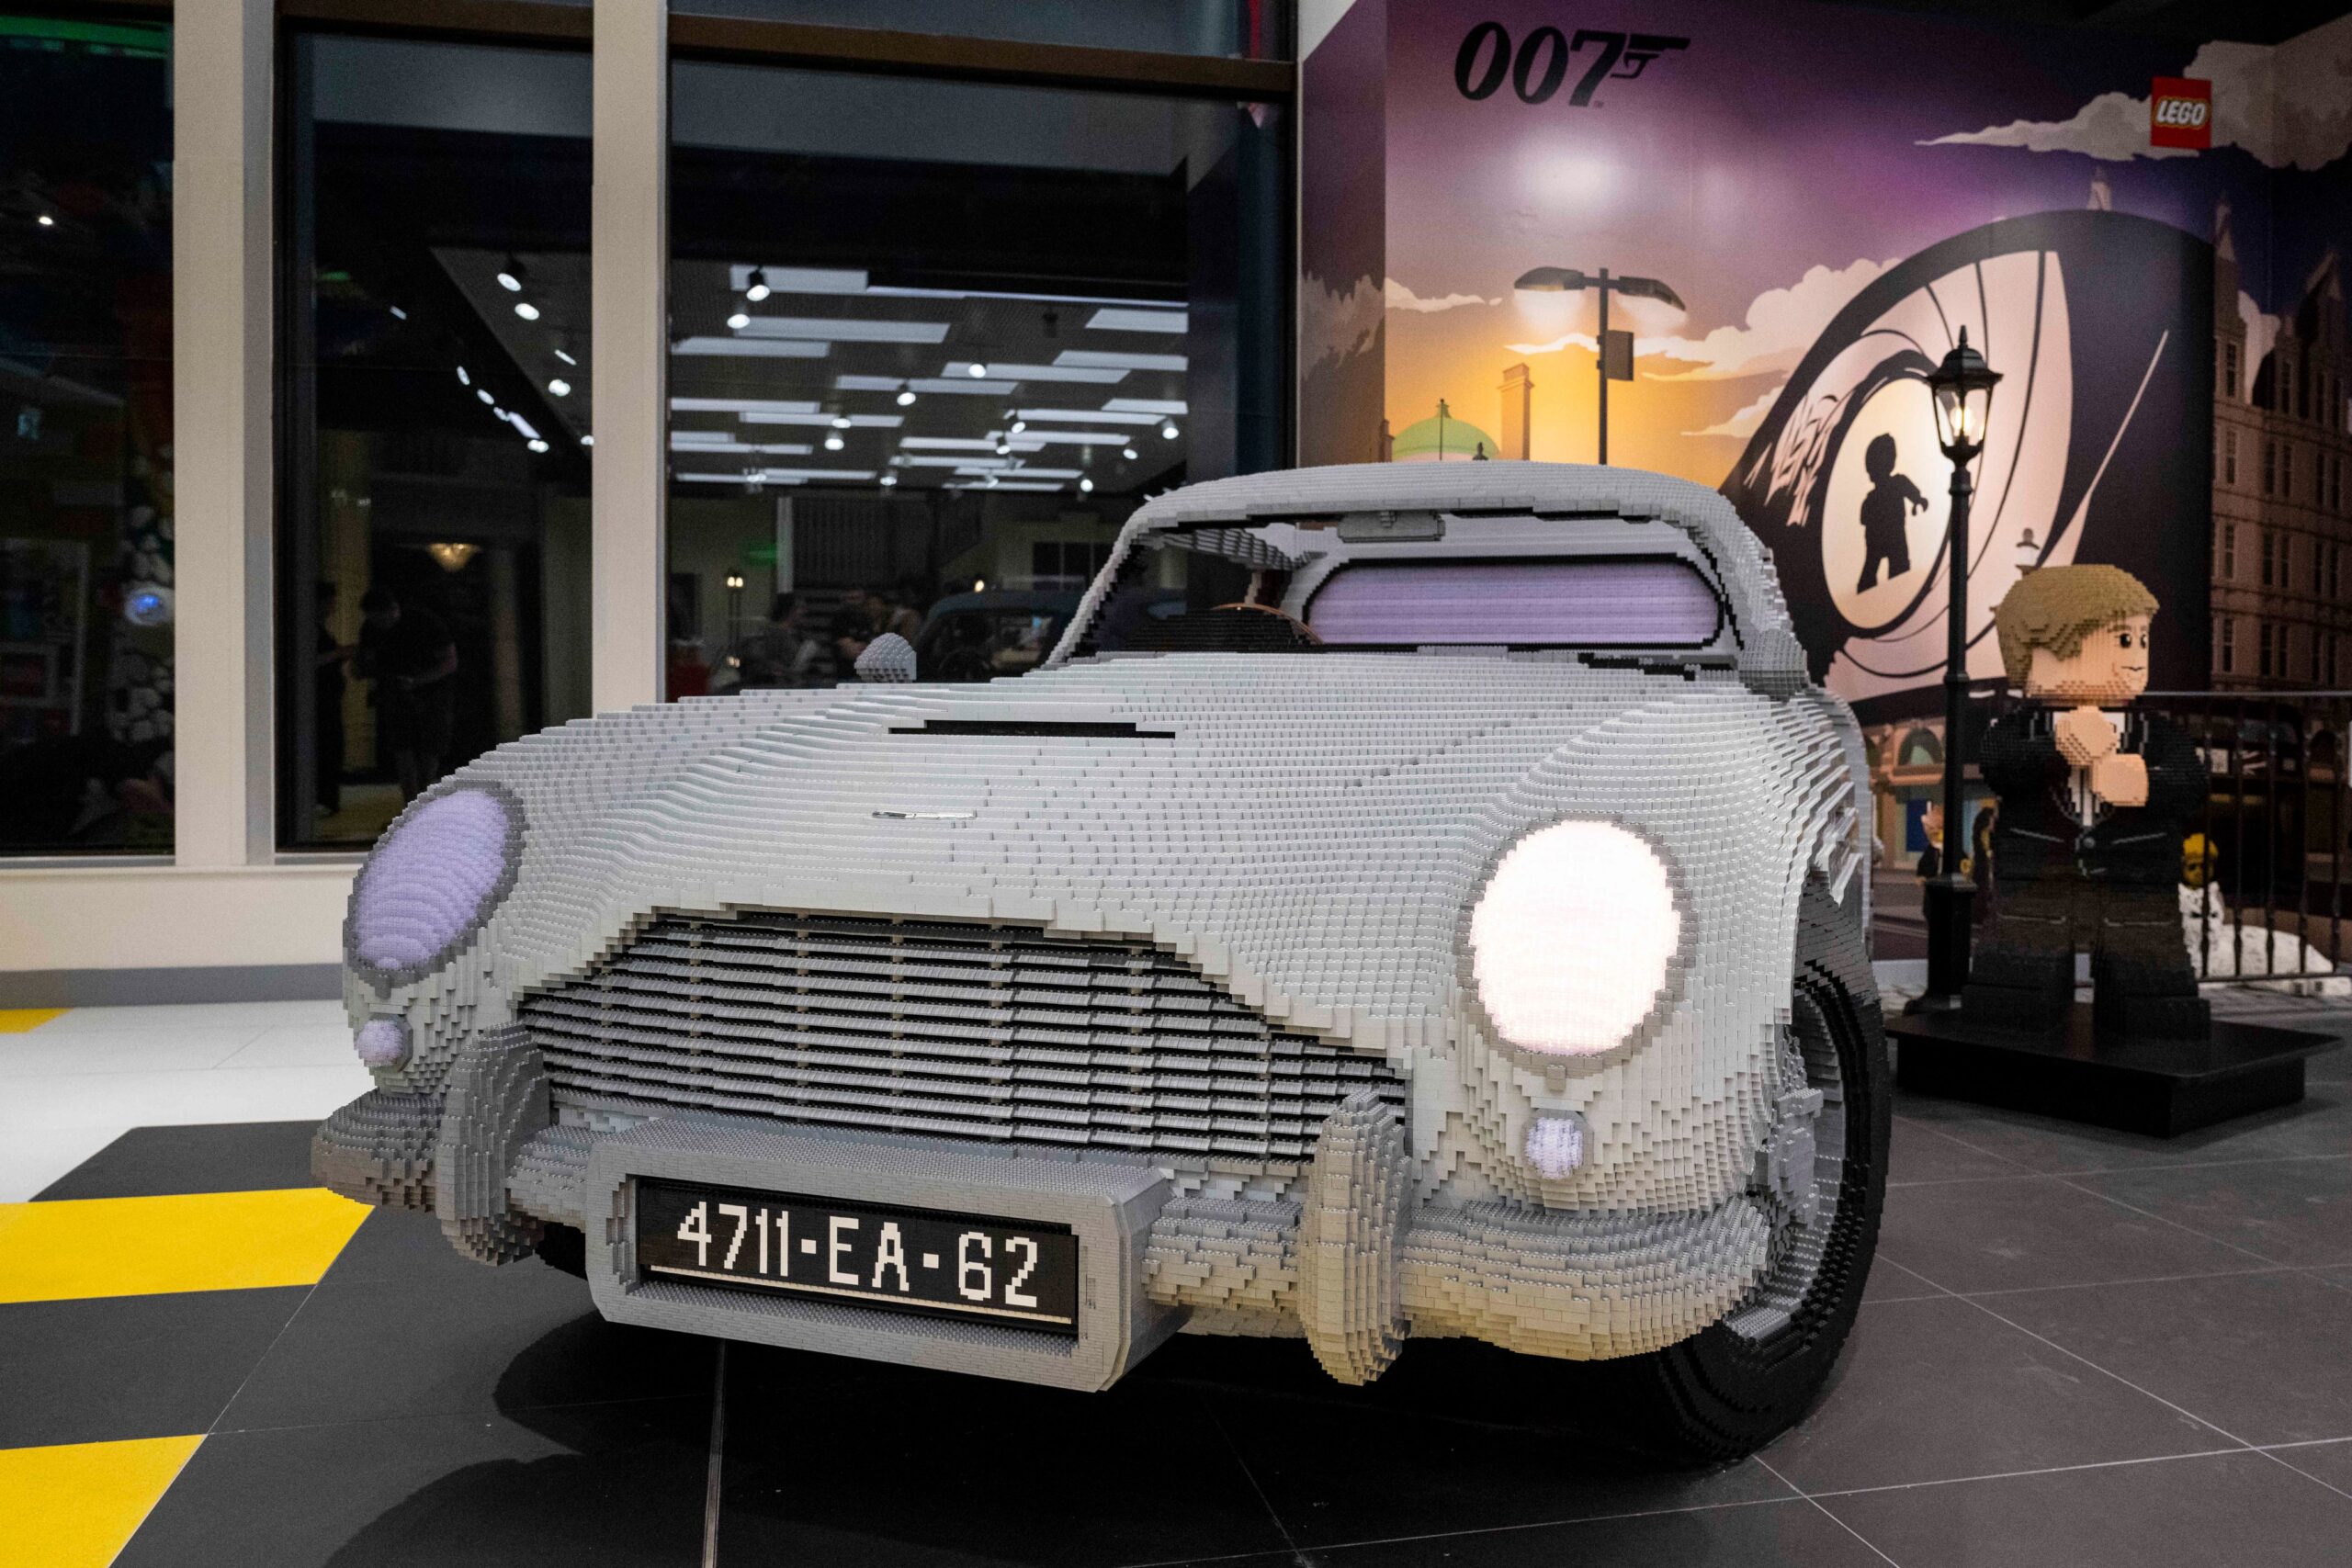 Now pay attention, 007 – you'll need 360,000 bricks to build this life-size Lego DB5